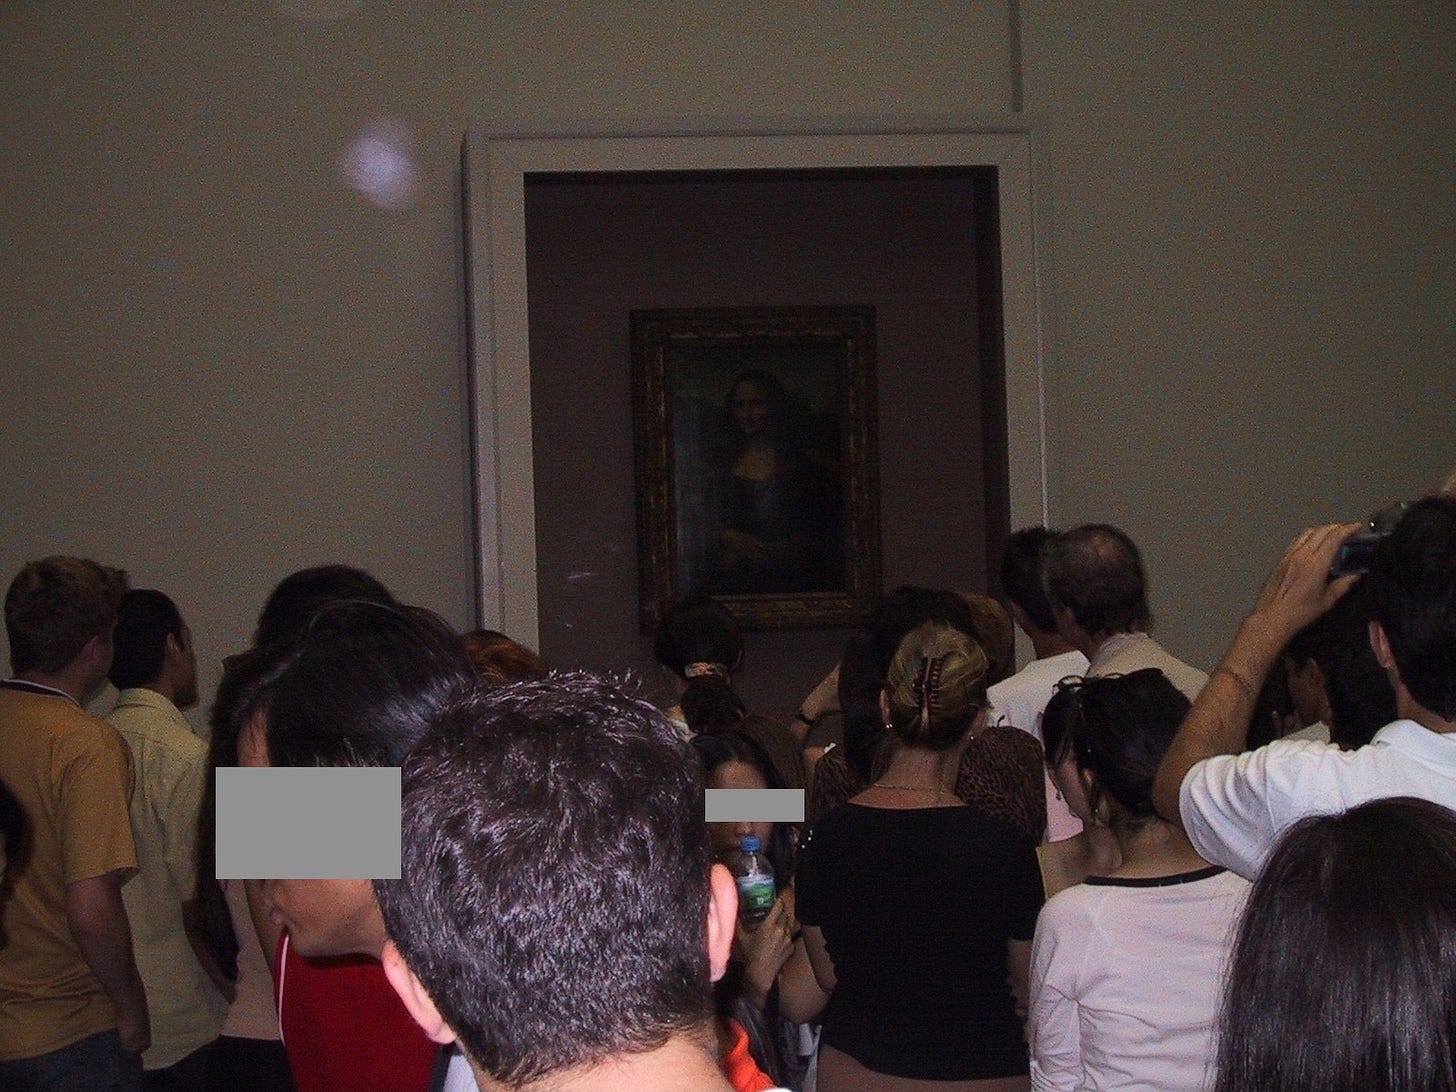 Photo taken by the author in 2002 on his first visit to the Louvre on a crowded summer’s day. The photo show a dim Mona Lisa behind protective glass. The majority of the photo succeeds in capturing the back of other people’s heads.